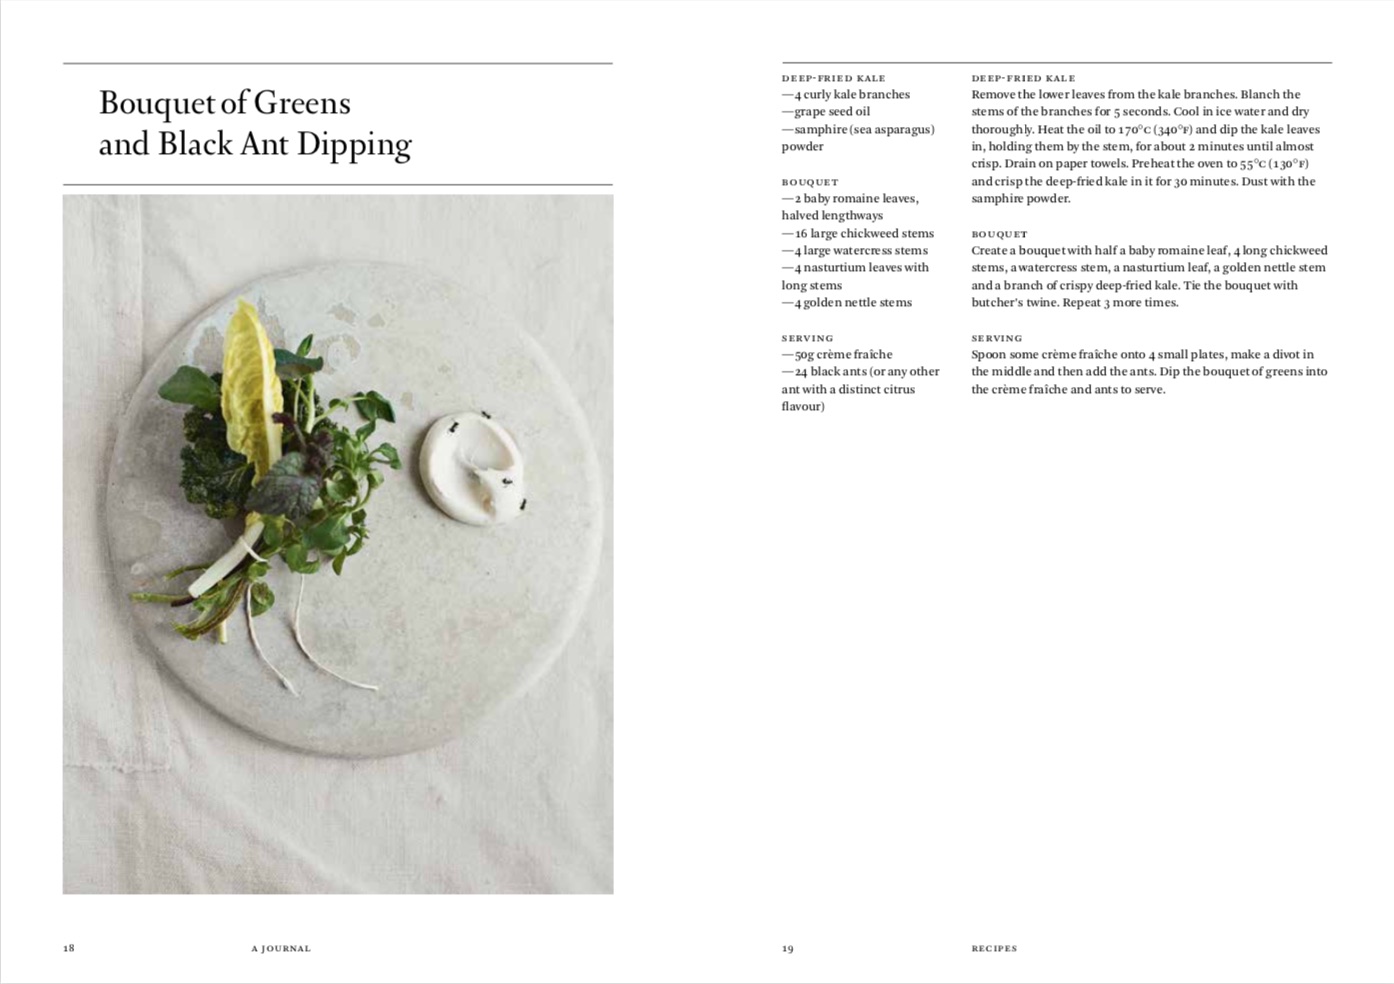 By Rene Redzepi from A Work in Progress: A Journal copyright Phaidon 2019